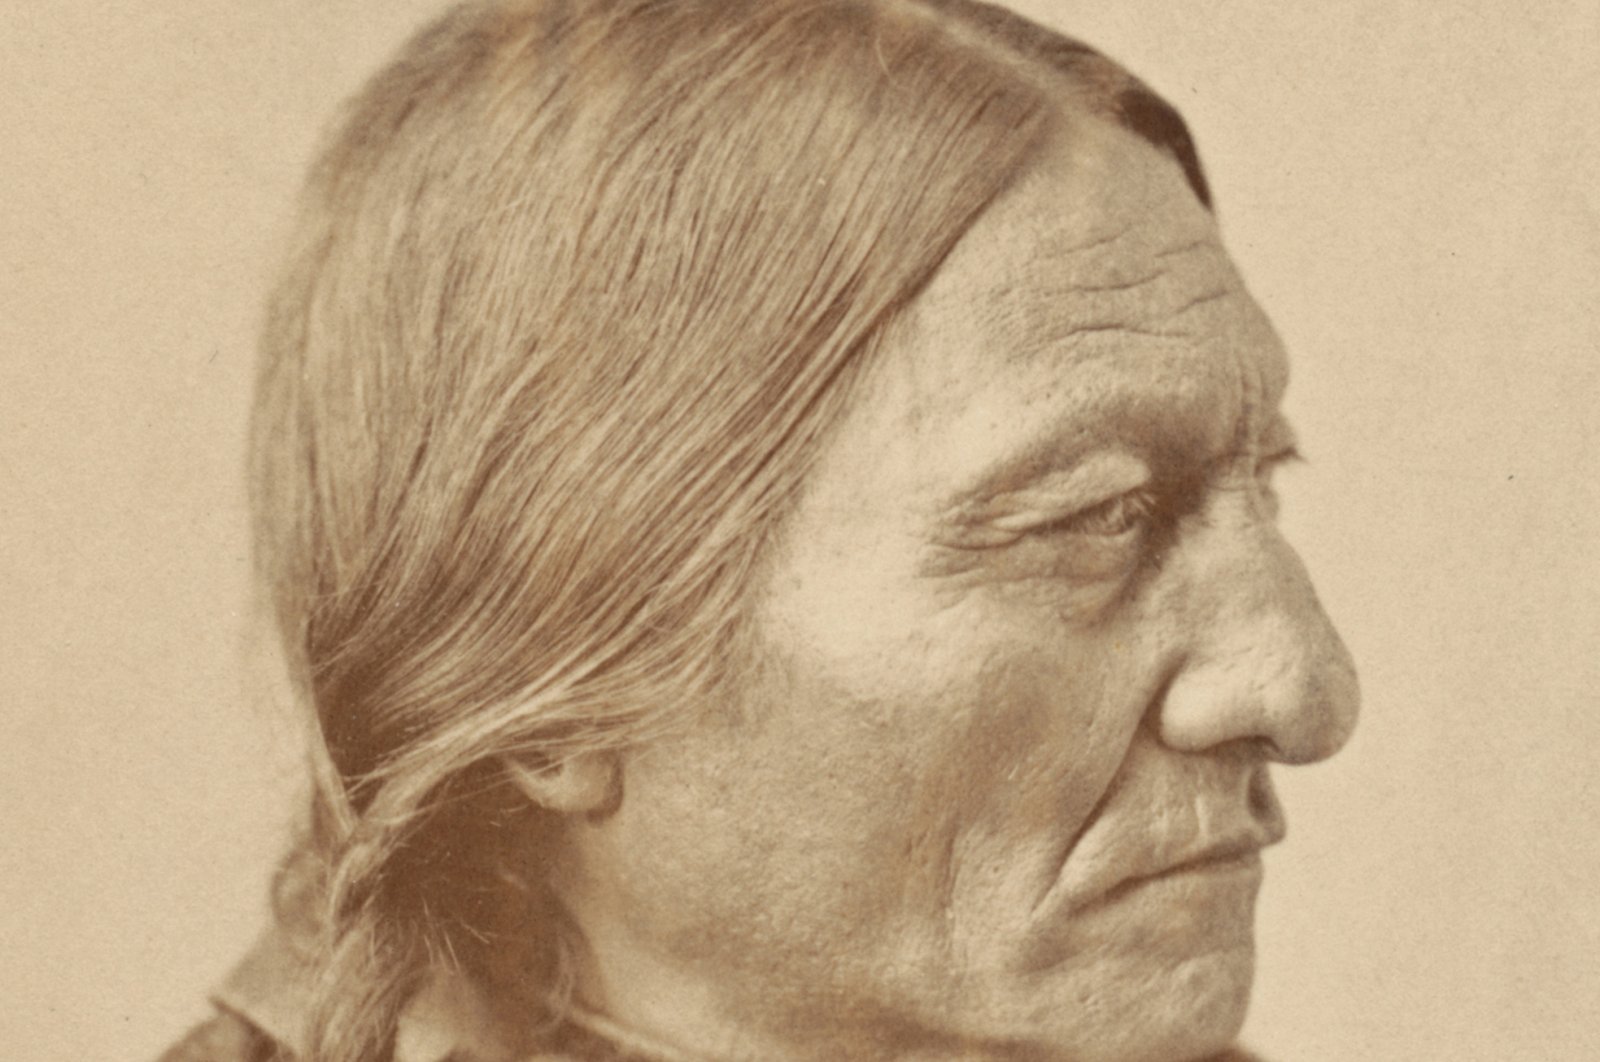 A picture of 19th-century Native American leader Sitting Bull at the National Portrait Gallery, in Smithsonian Institution, Washington, D.C., U.S., c. 1831 (Image by Reuters)